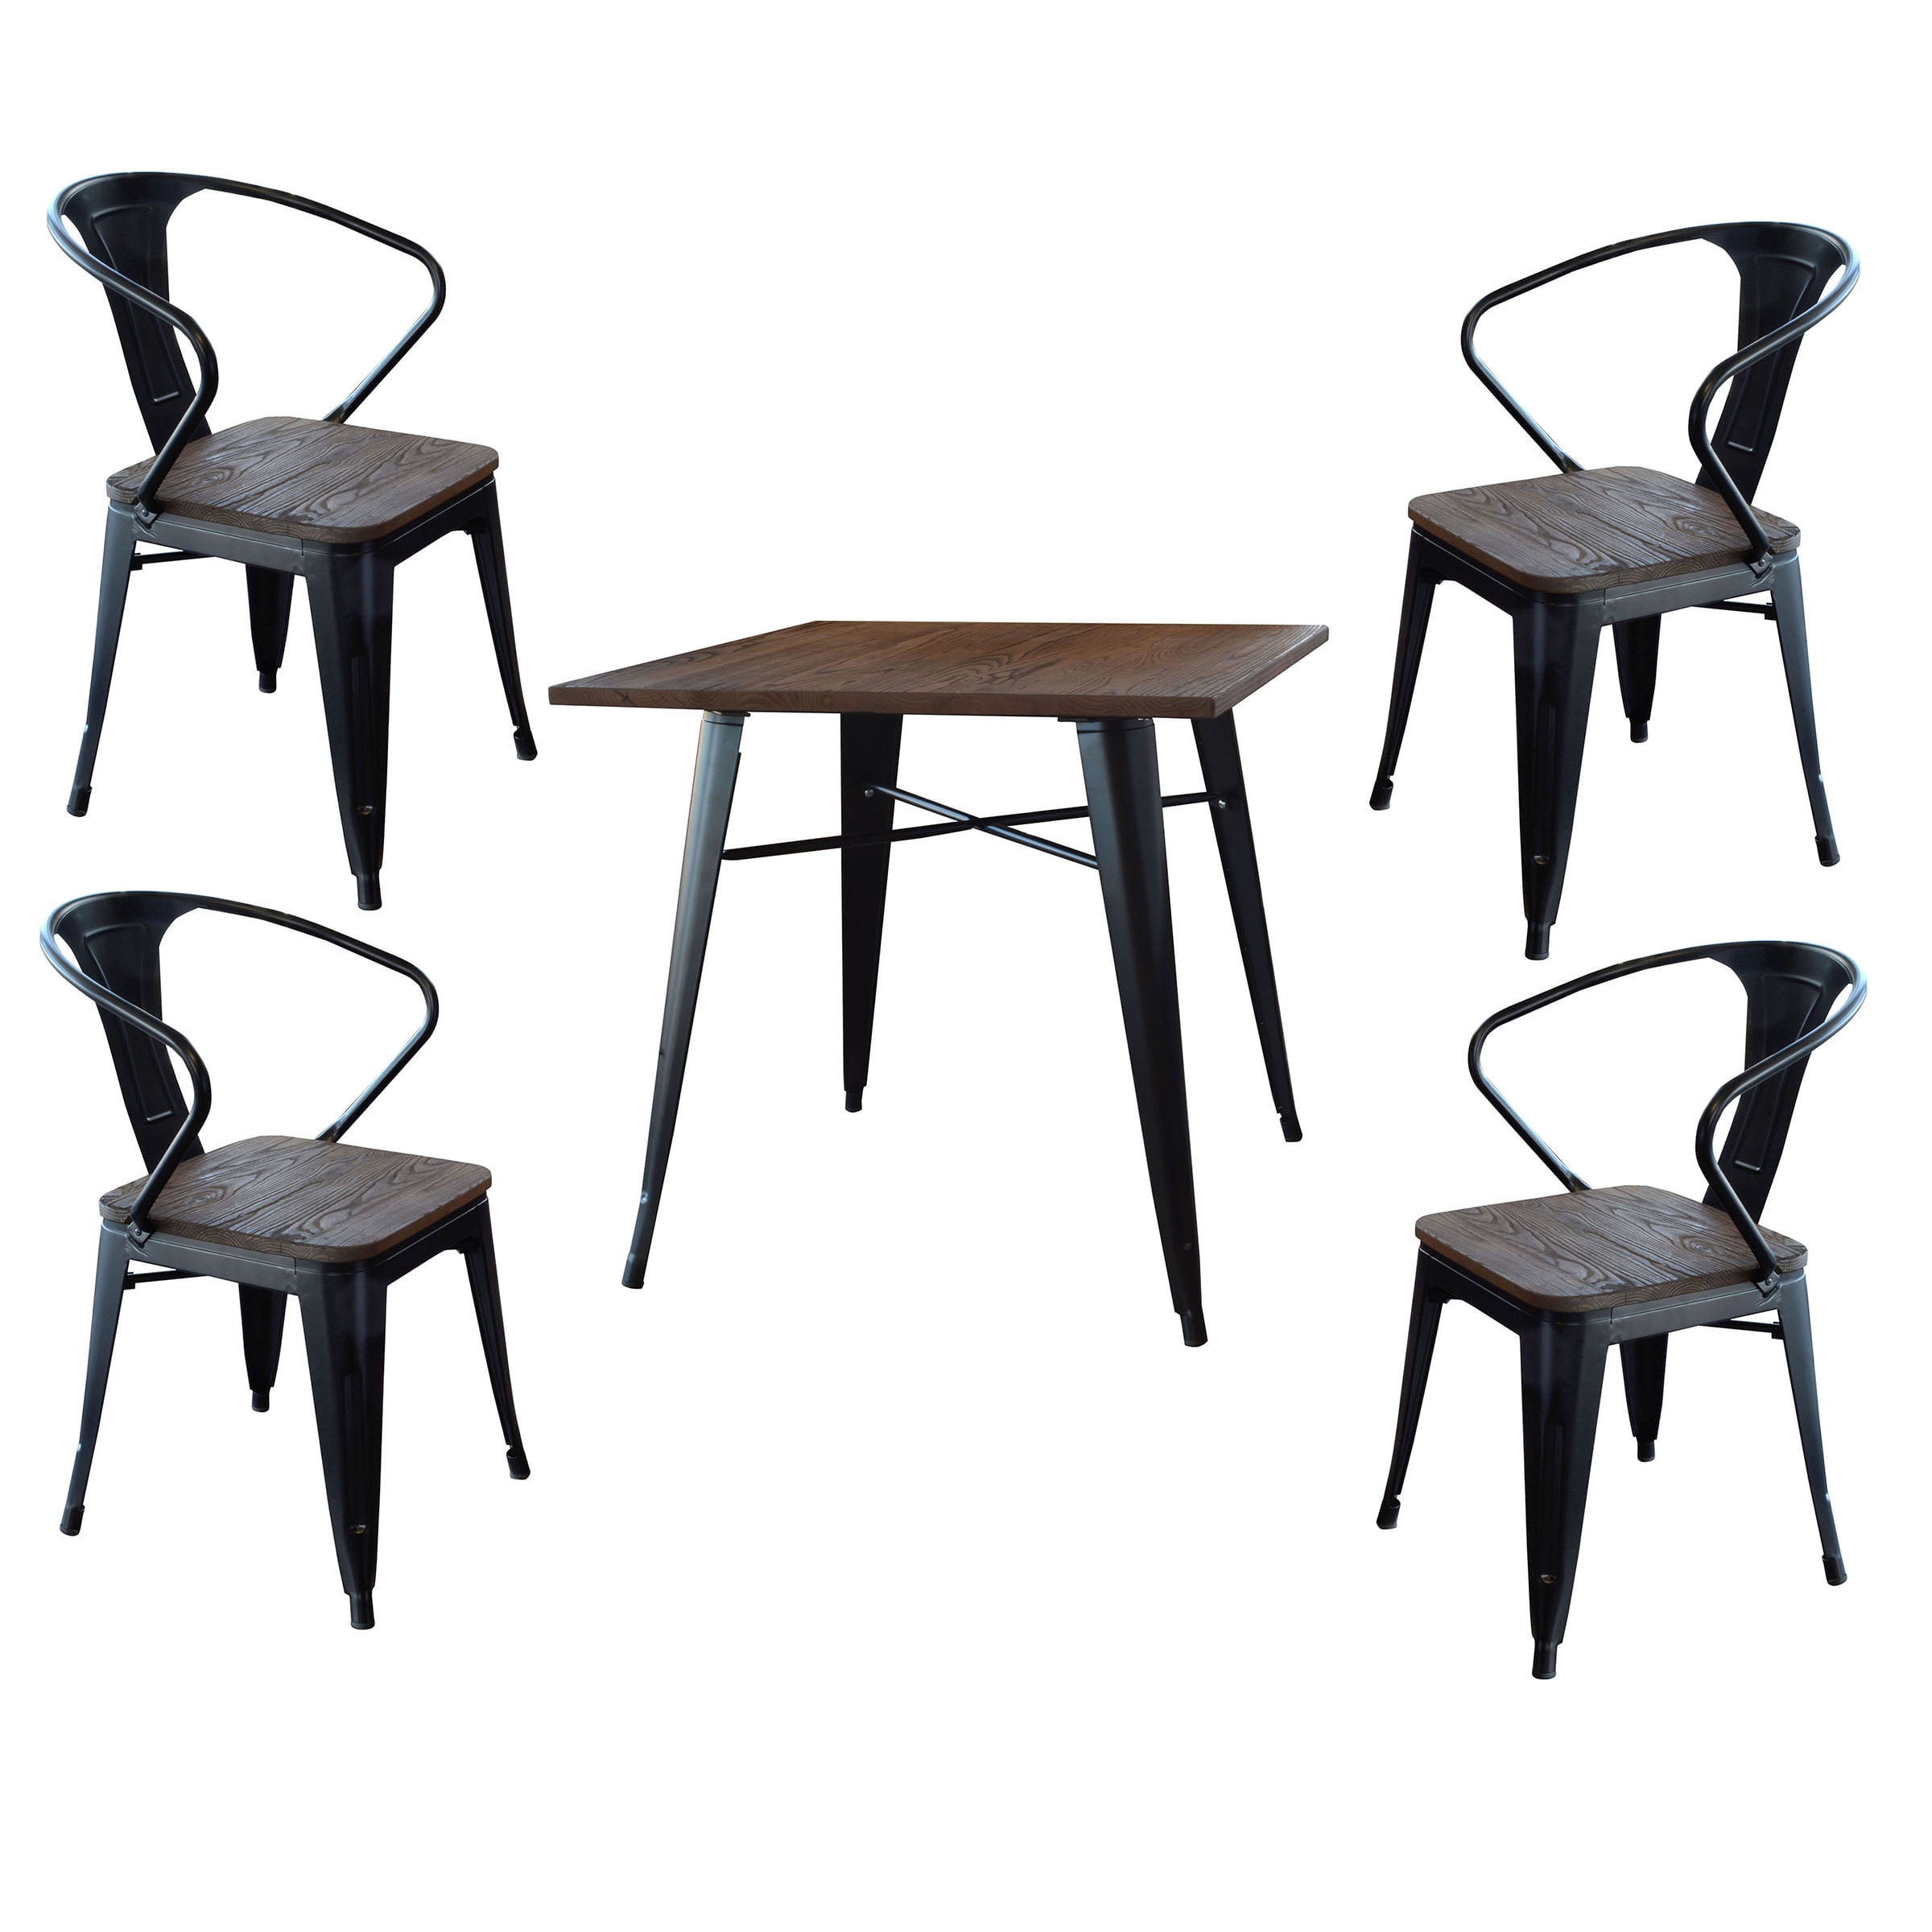 Loft Glossy Black Dining Set with Wood Tops - 5 Piece